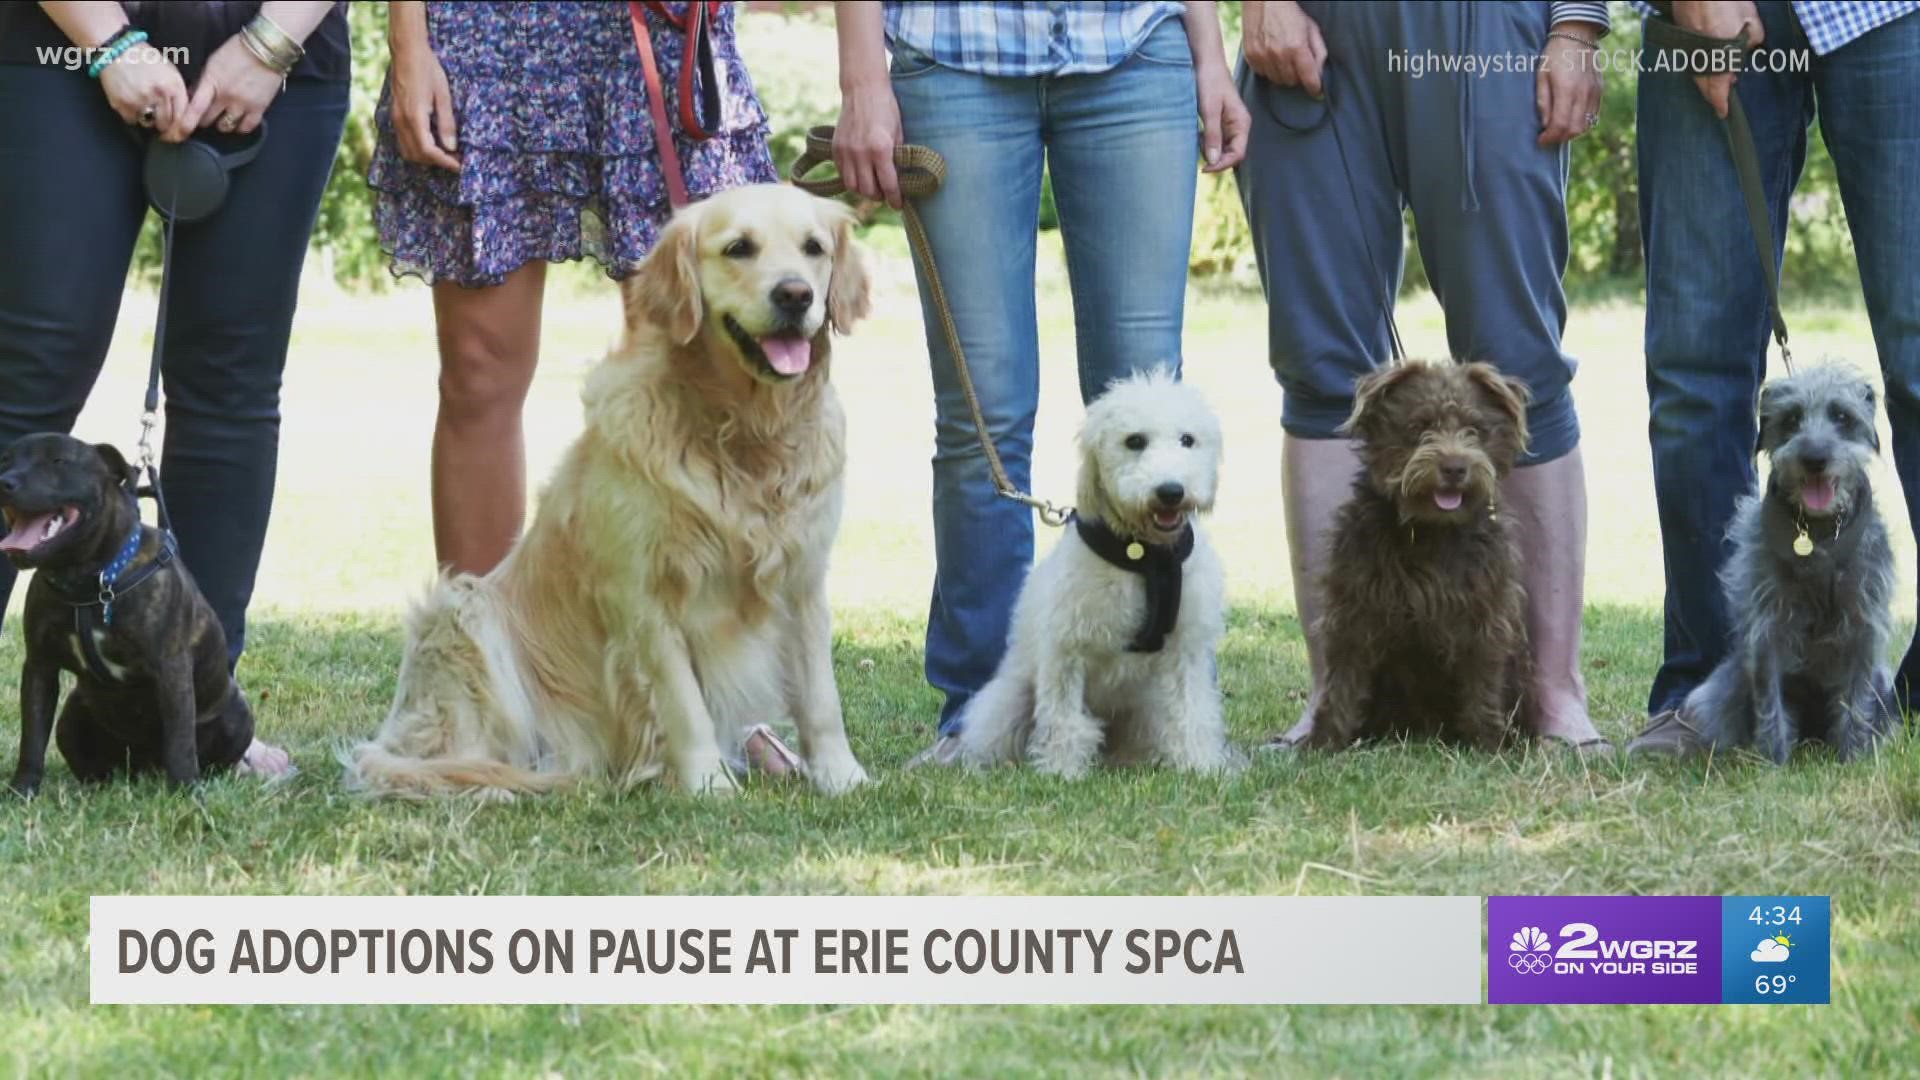 Dog adoptions on pause at Erie County SPCA